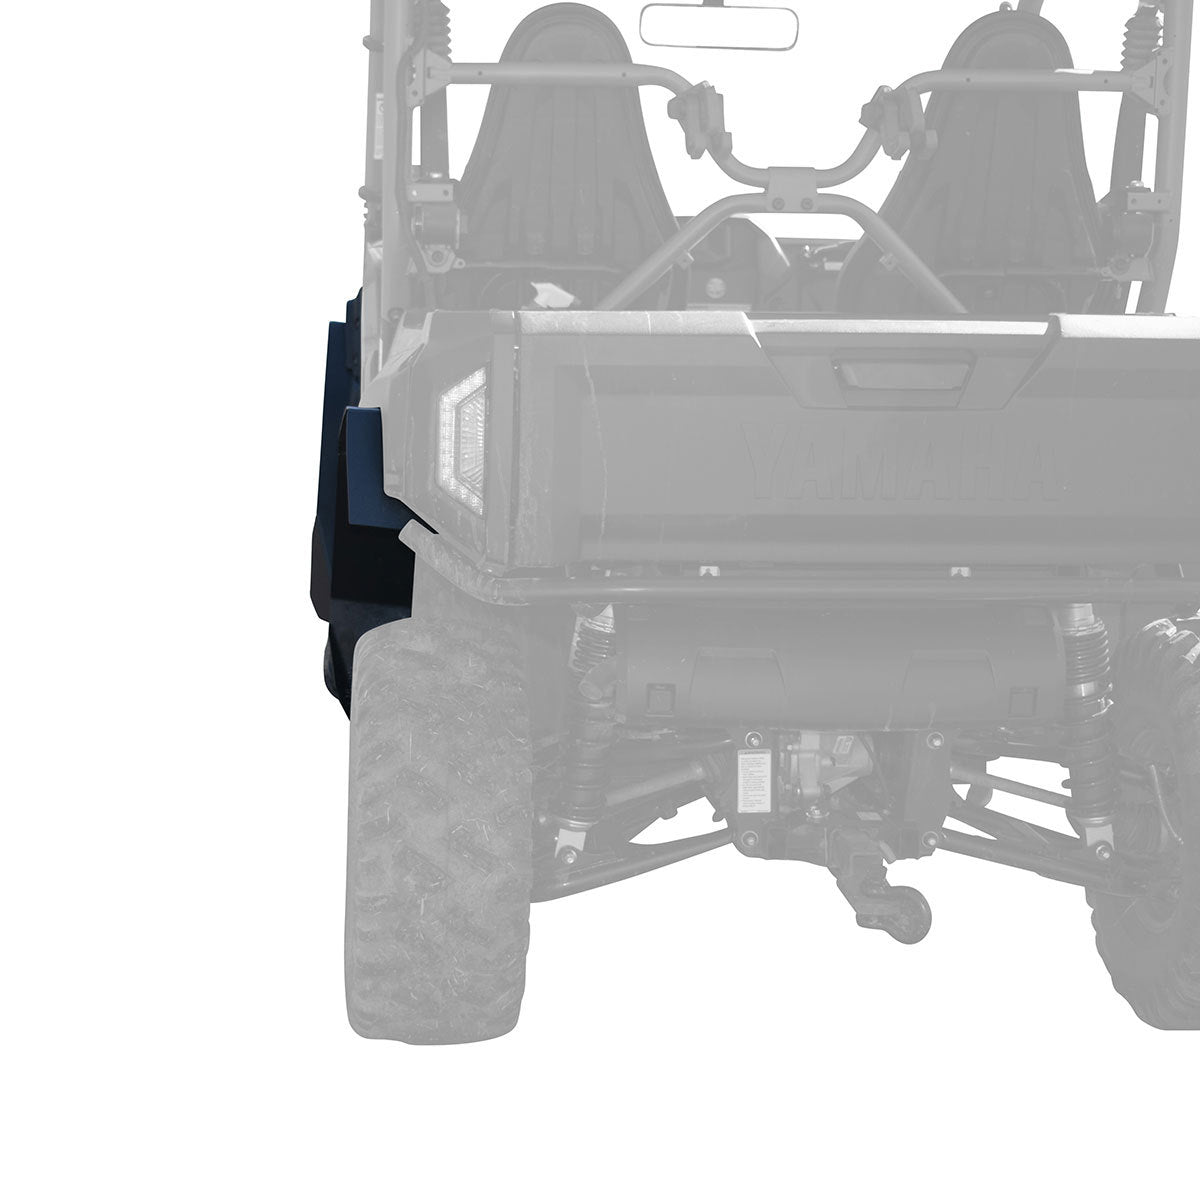 2019-2022 Yamaha Wolverine X2 R-Spec and R-Spec XT-R Max Coverage Fender Flares